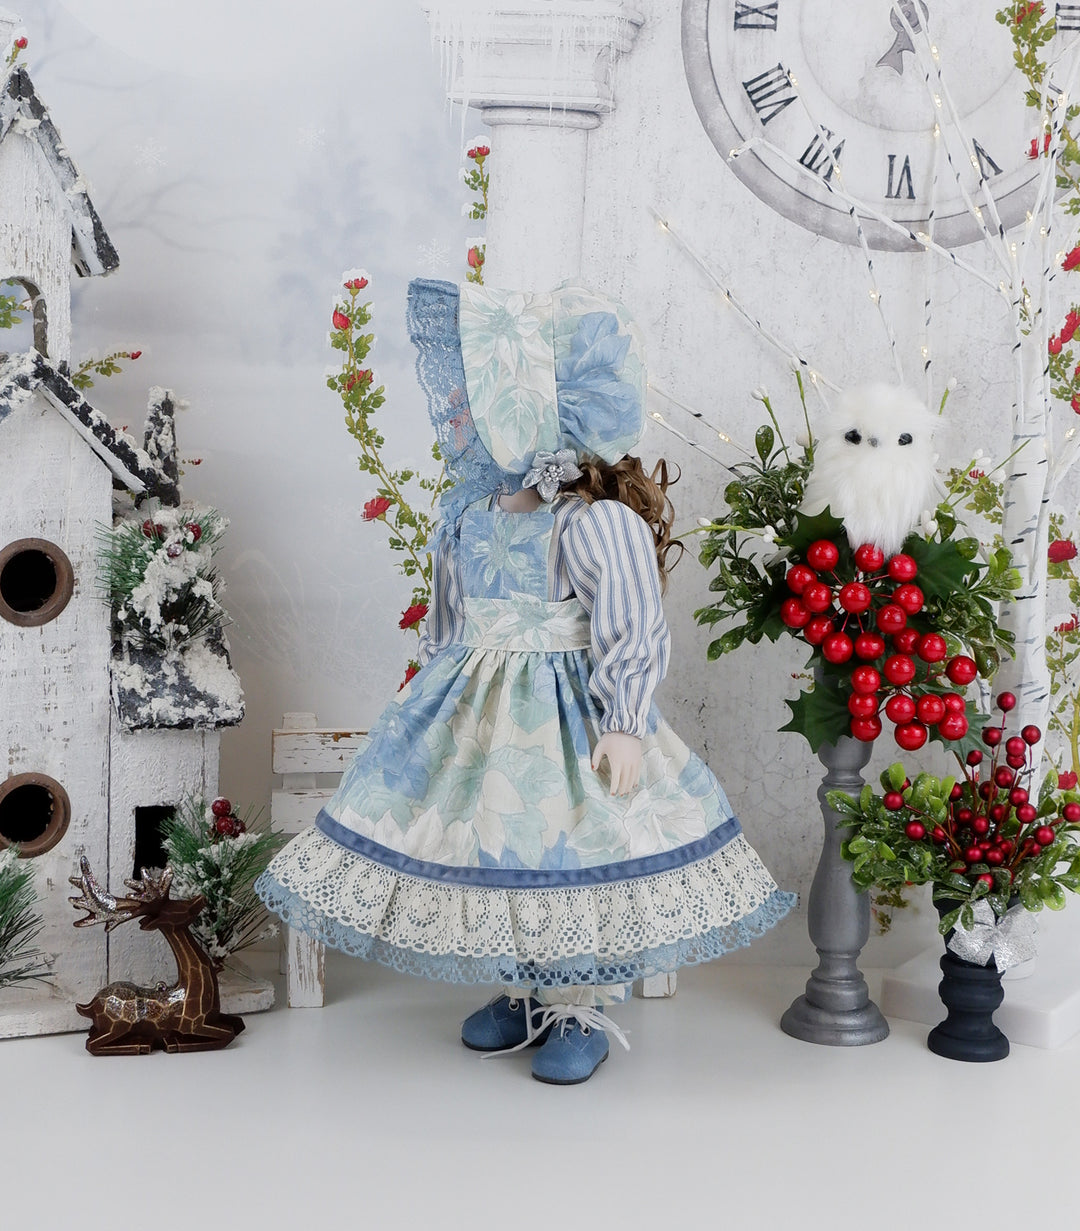 Prairie Poinsettia - dress, bonnet & apron with boots for Ruby Red Fashion Friends doll